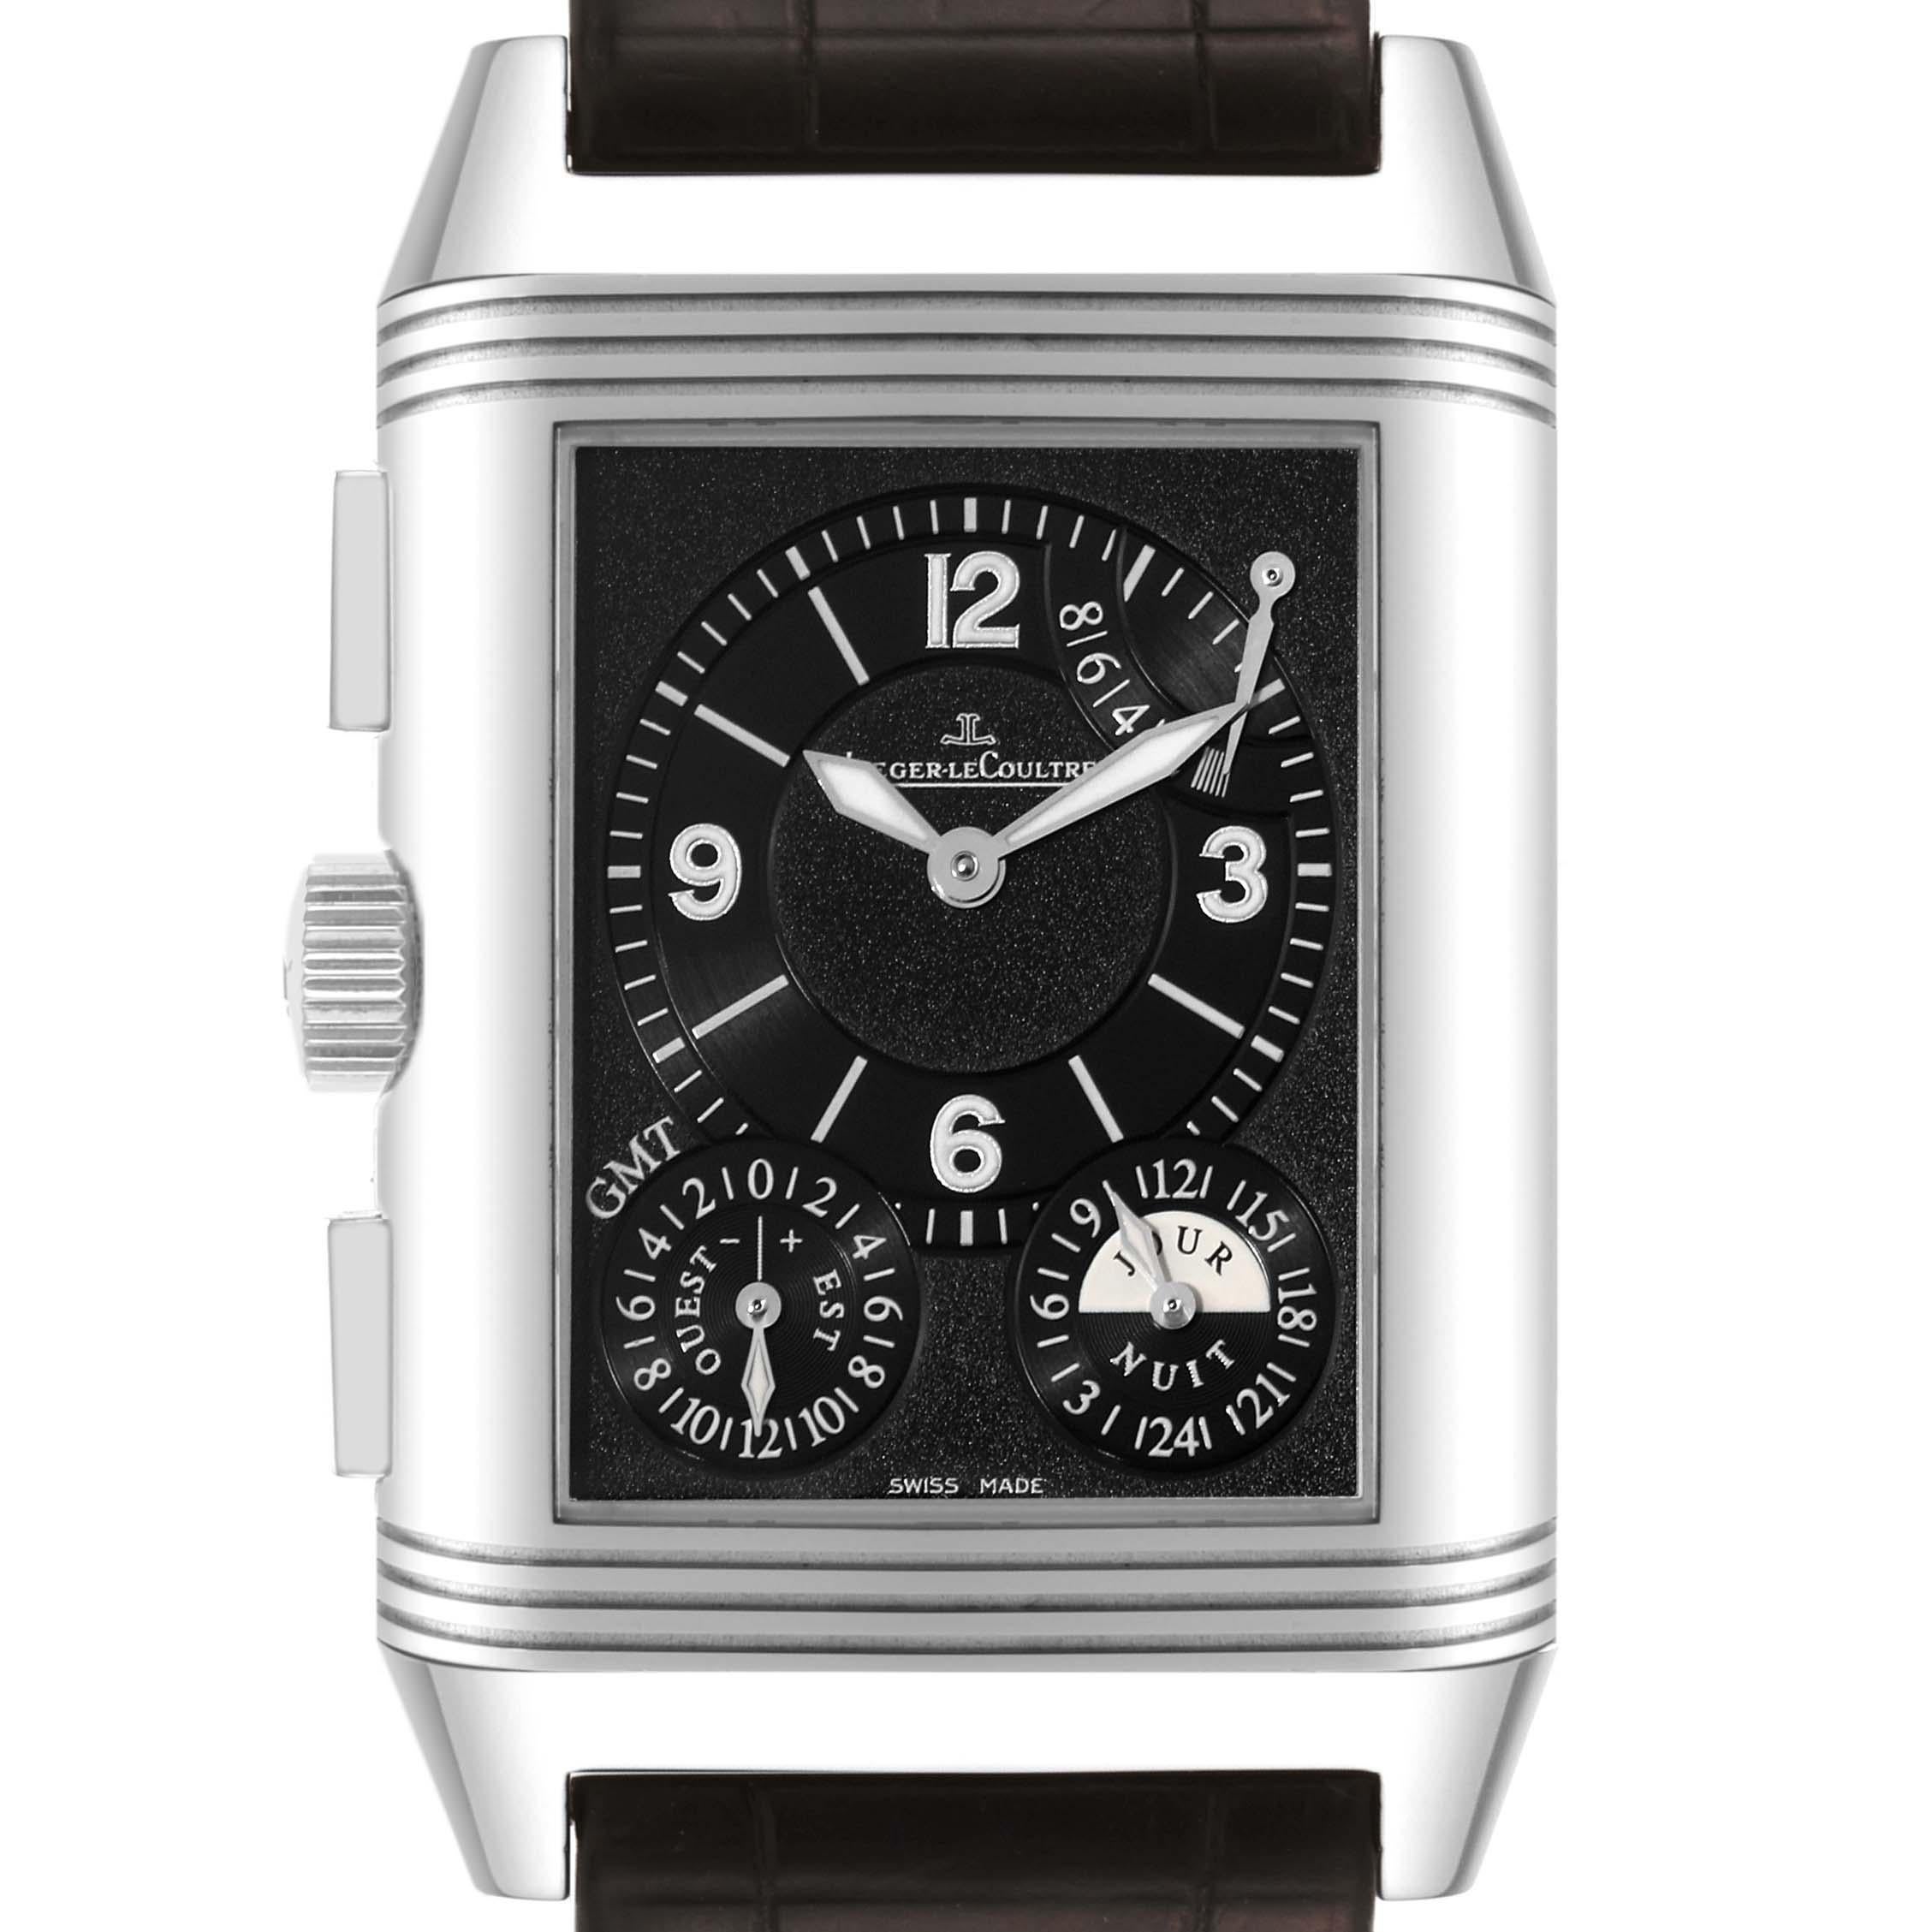 Jaeger LeCoultre Reverso Grande GMT Steel Mens Watch 240.8.18 Q3028420 Box Papers. Manual winding movement. Stainless steel 47.0 x 29.0 mm rectangular case rotating within its back plate. Stainless steel reeded bezel. Scratch resistant sapphire